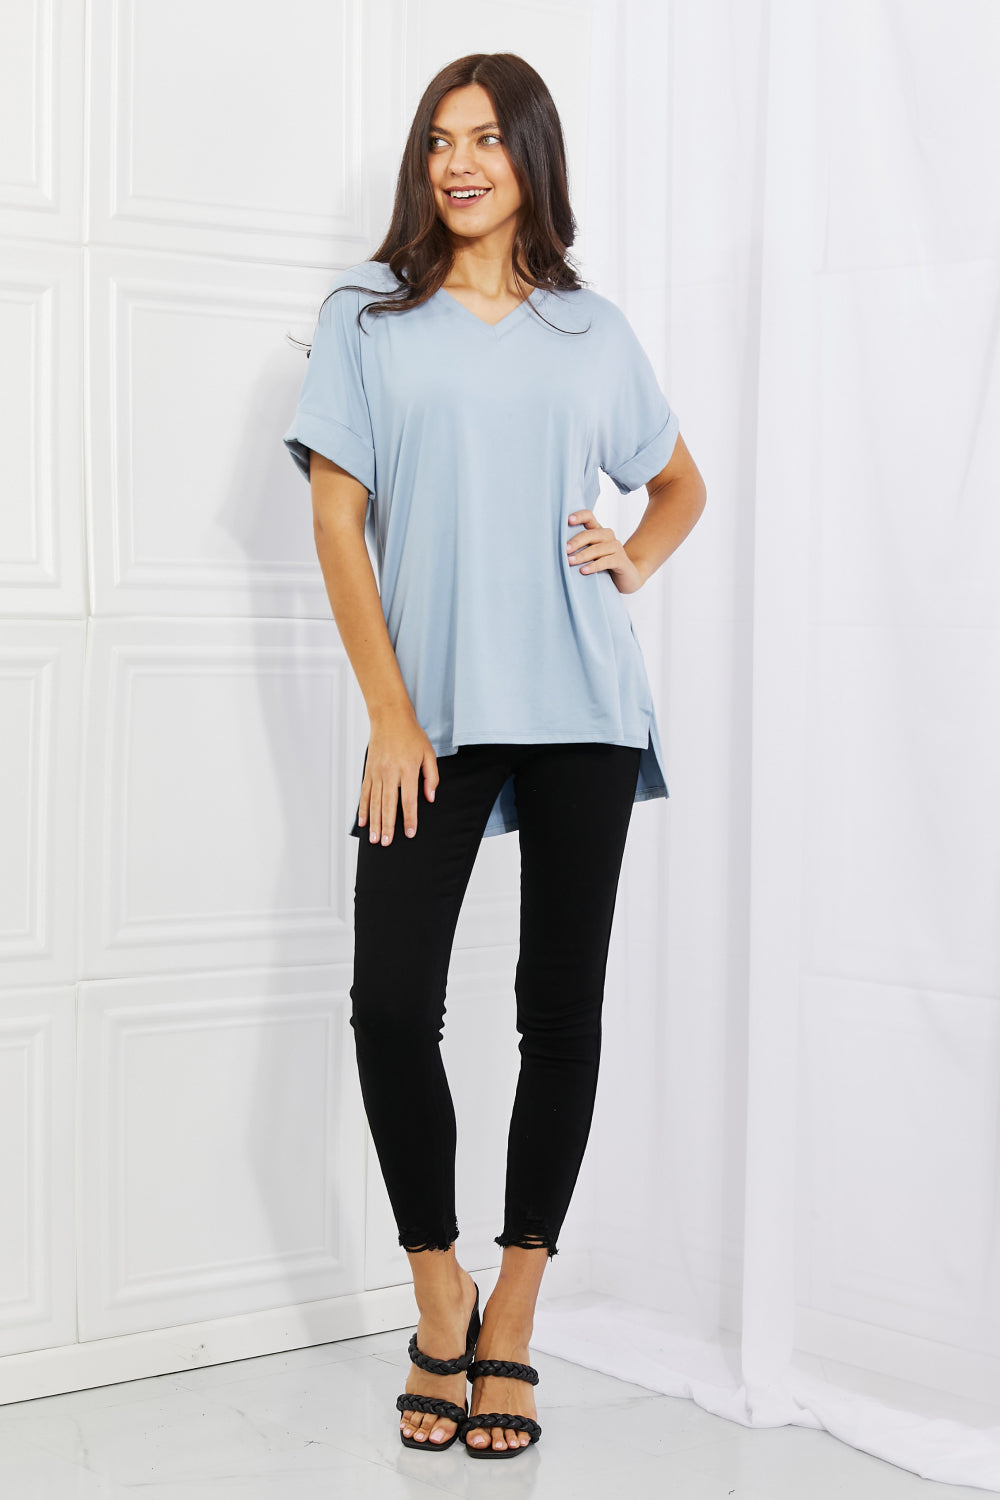 Zenana Simply Comfy Full Size V-Neck Loose Fit Shirt in Blue-Short Sleeve Tops-Inspired by Justeen-Women's Clothing Boutique in Chicago, Illinois